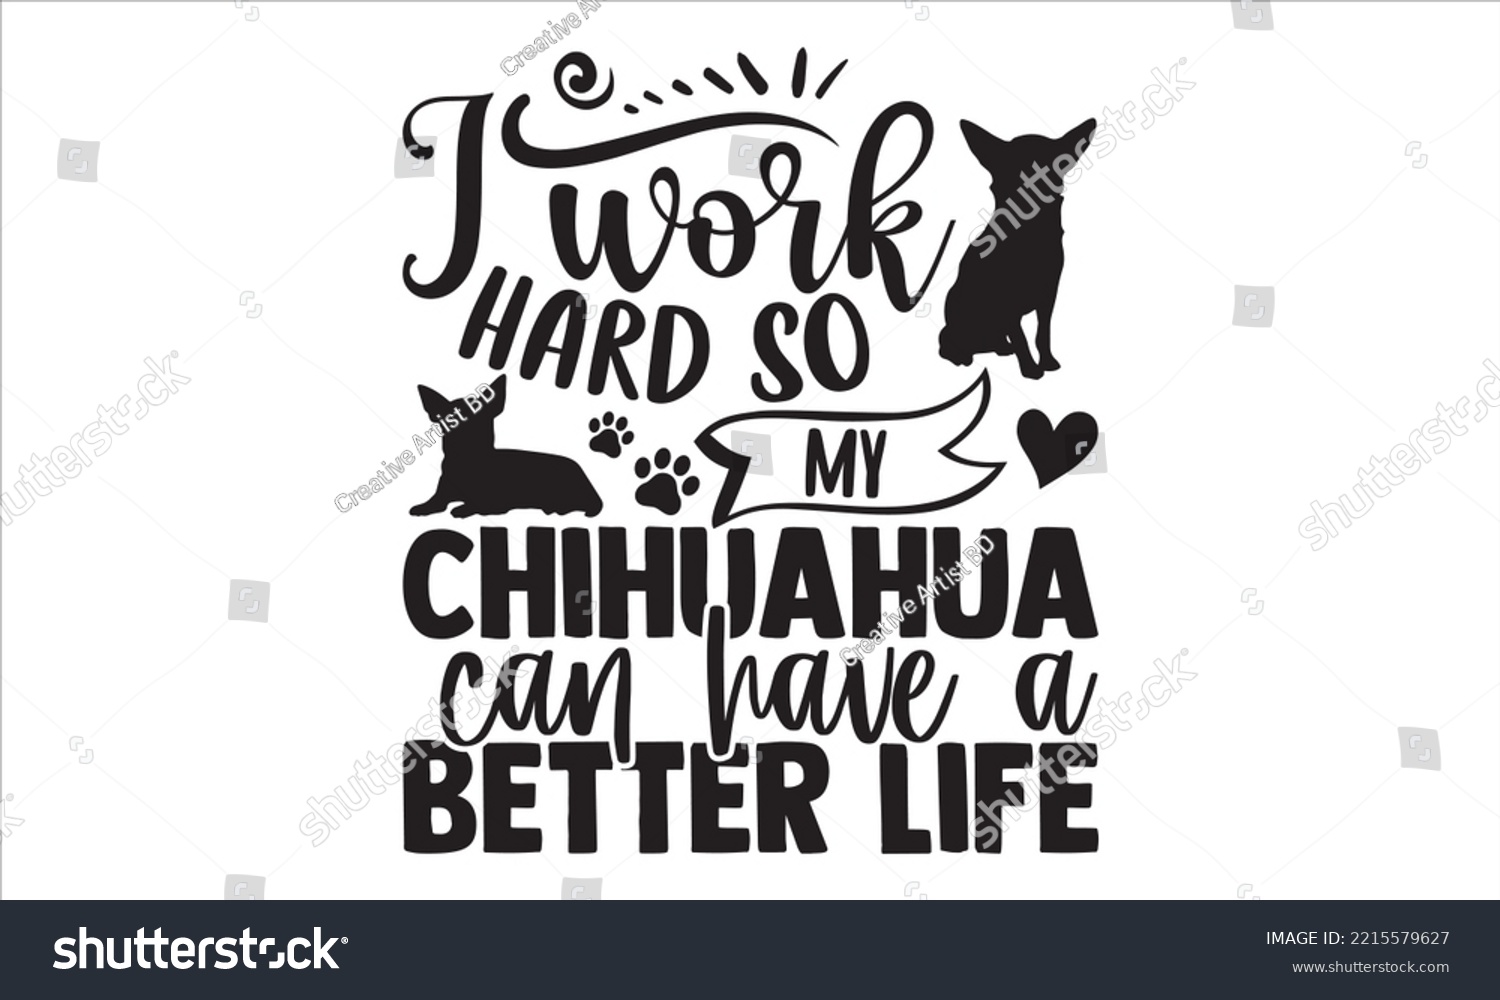 SVG of I Work Hard So My Chihuahua Can Have A Better Life - Chihuahua T shirt Design, Modern calligraphy, Cut Files for Cricut Svg, Illustration for prints on bags, posters svg